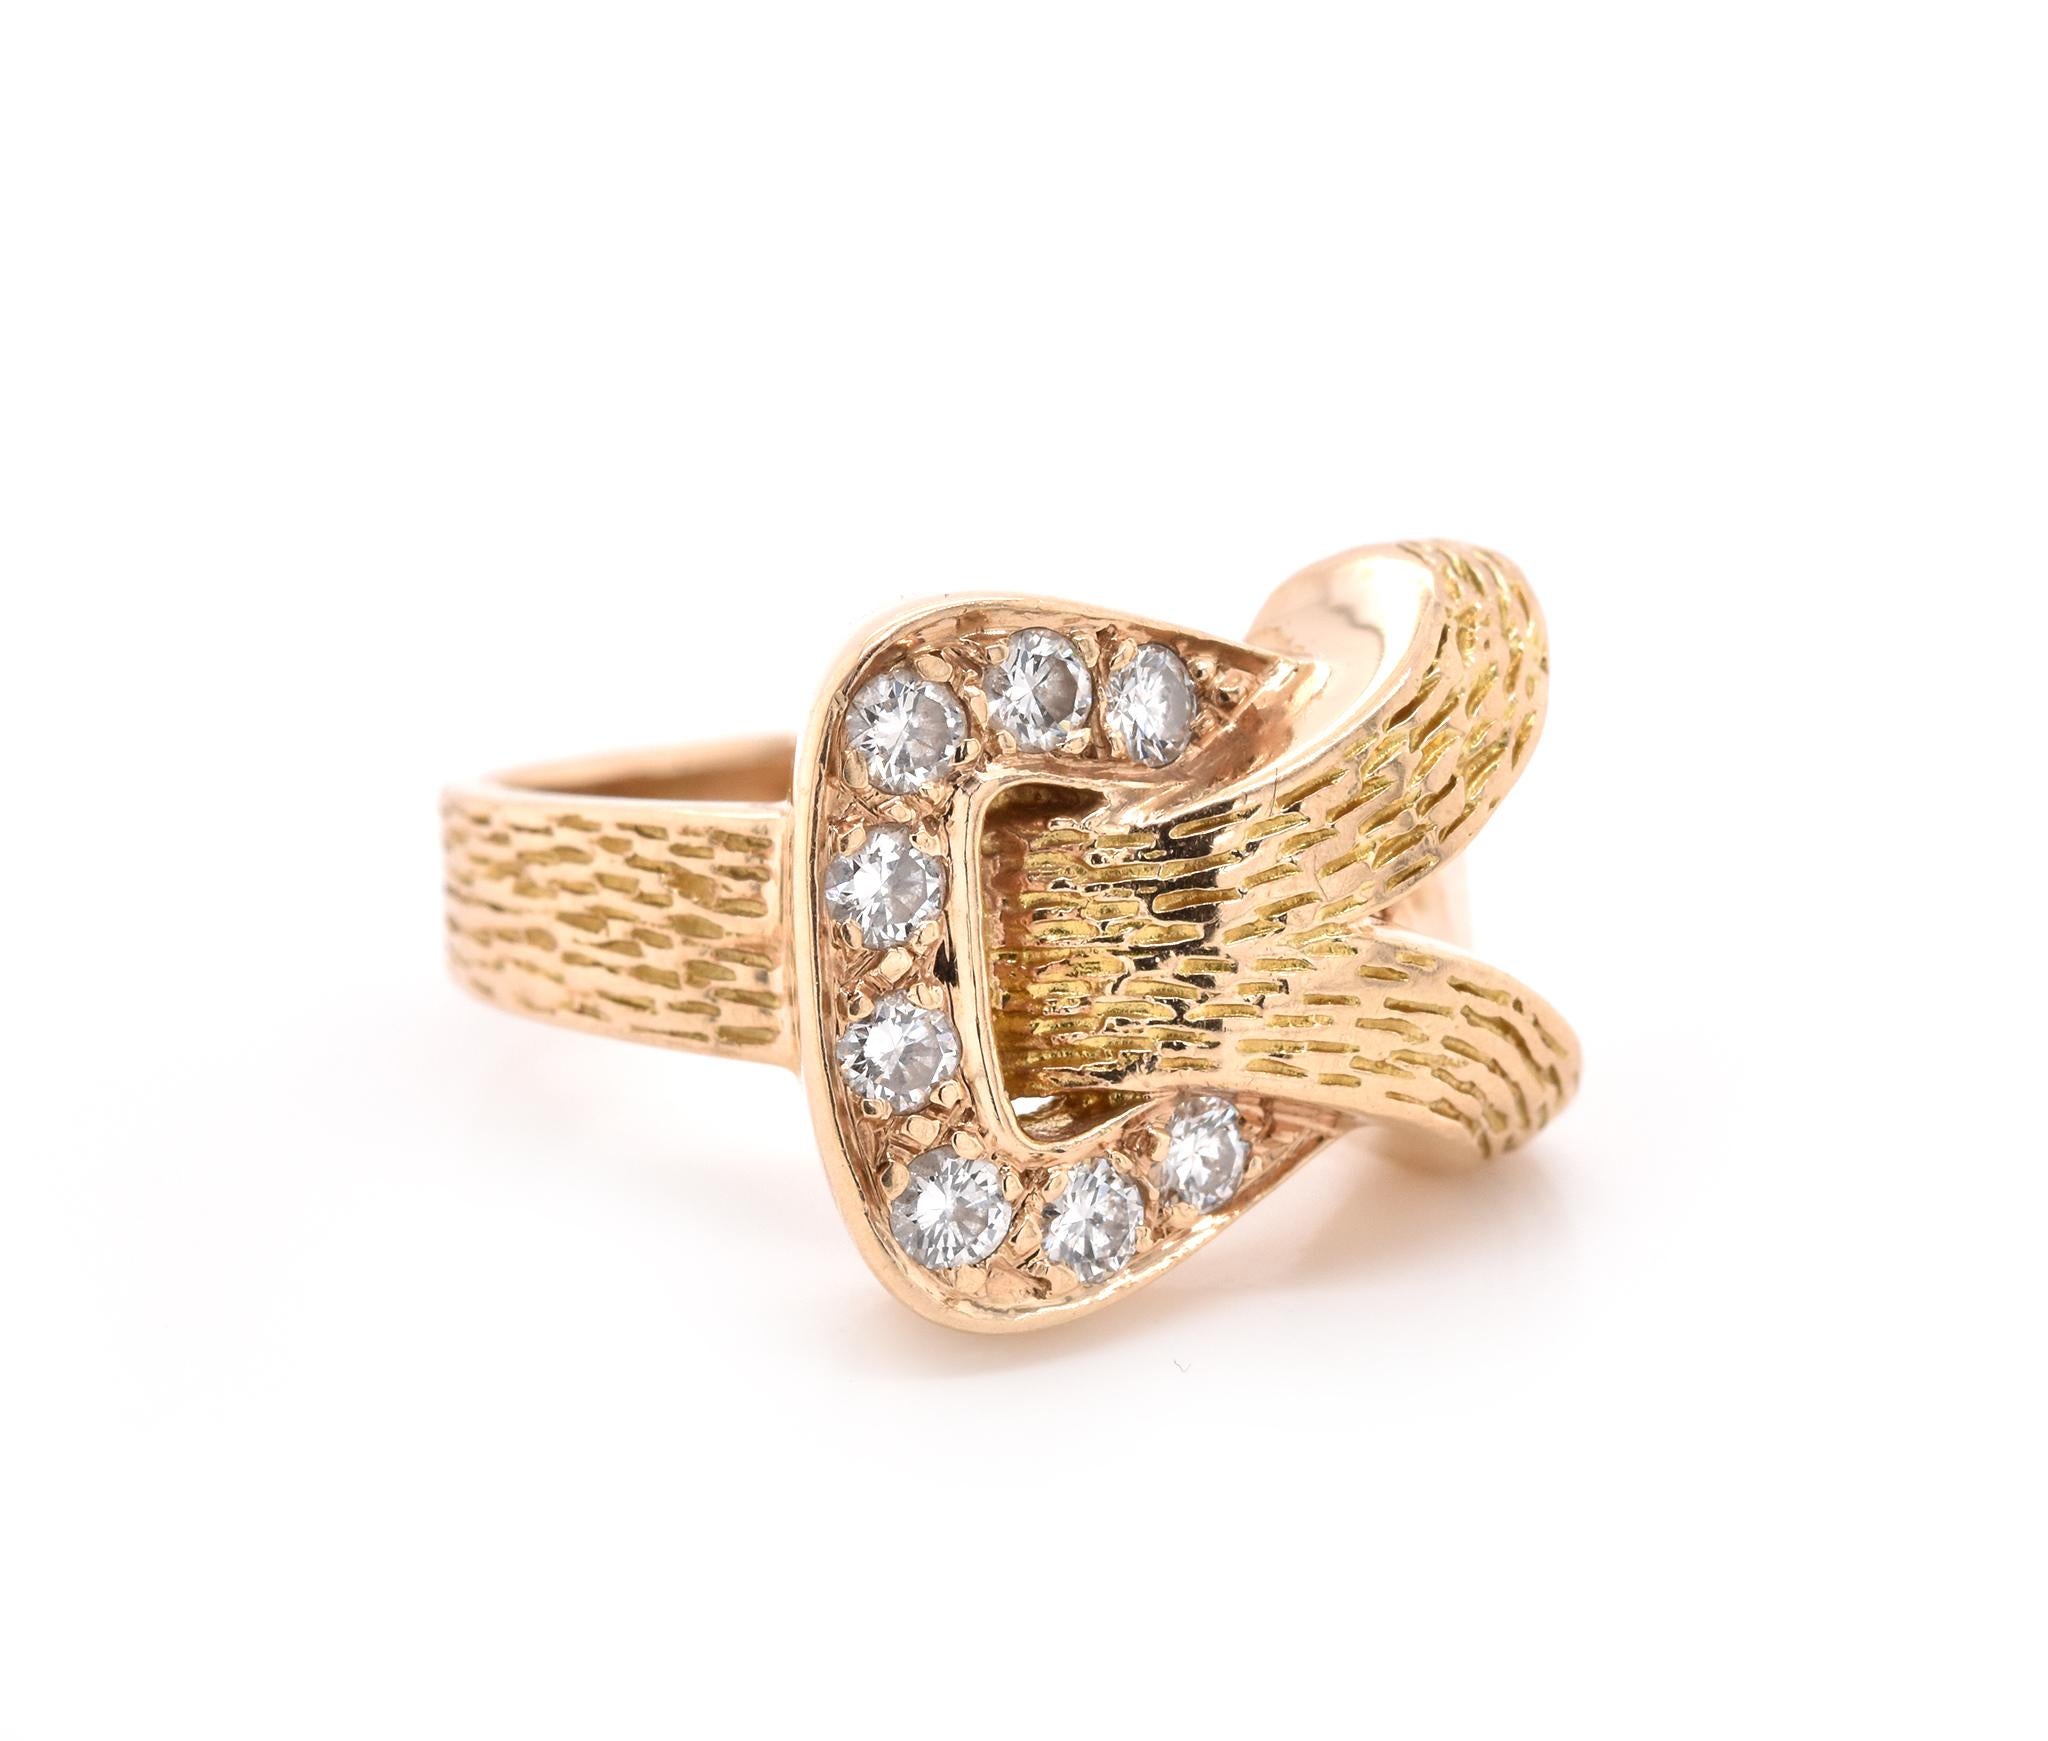 Designer: Henry Dankner
Material: 14k yellow gold
Diamonds: 8 round brilliant cuts = 0.32cttw
Color: G
Clarity: VS
Ring Size: 5 ½ (please allow up to 2 additional business days for sizing requests)
Dimensions: ring top measures 13.15mm x